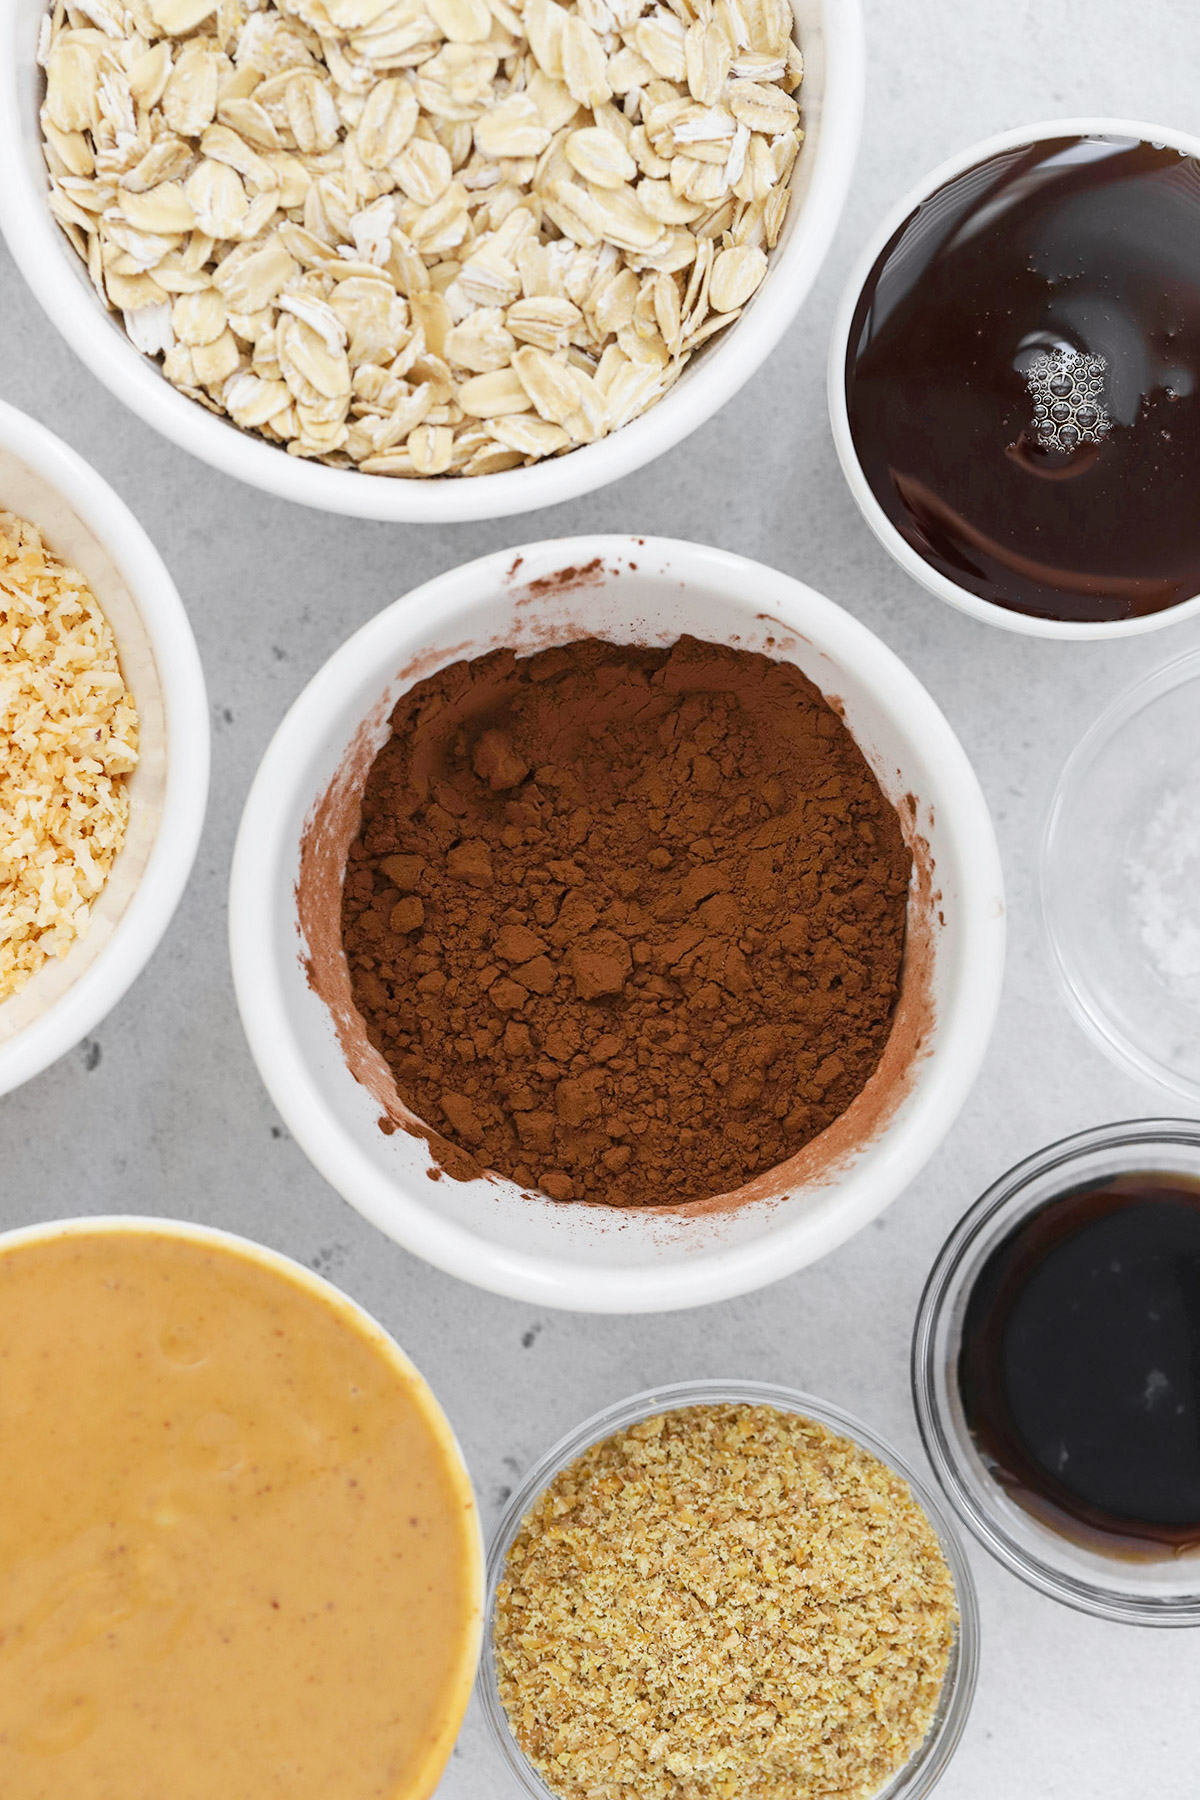 Overhead view of ingredients for chocolate peanut butter no bake cookie energy bites